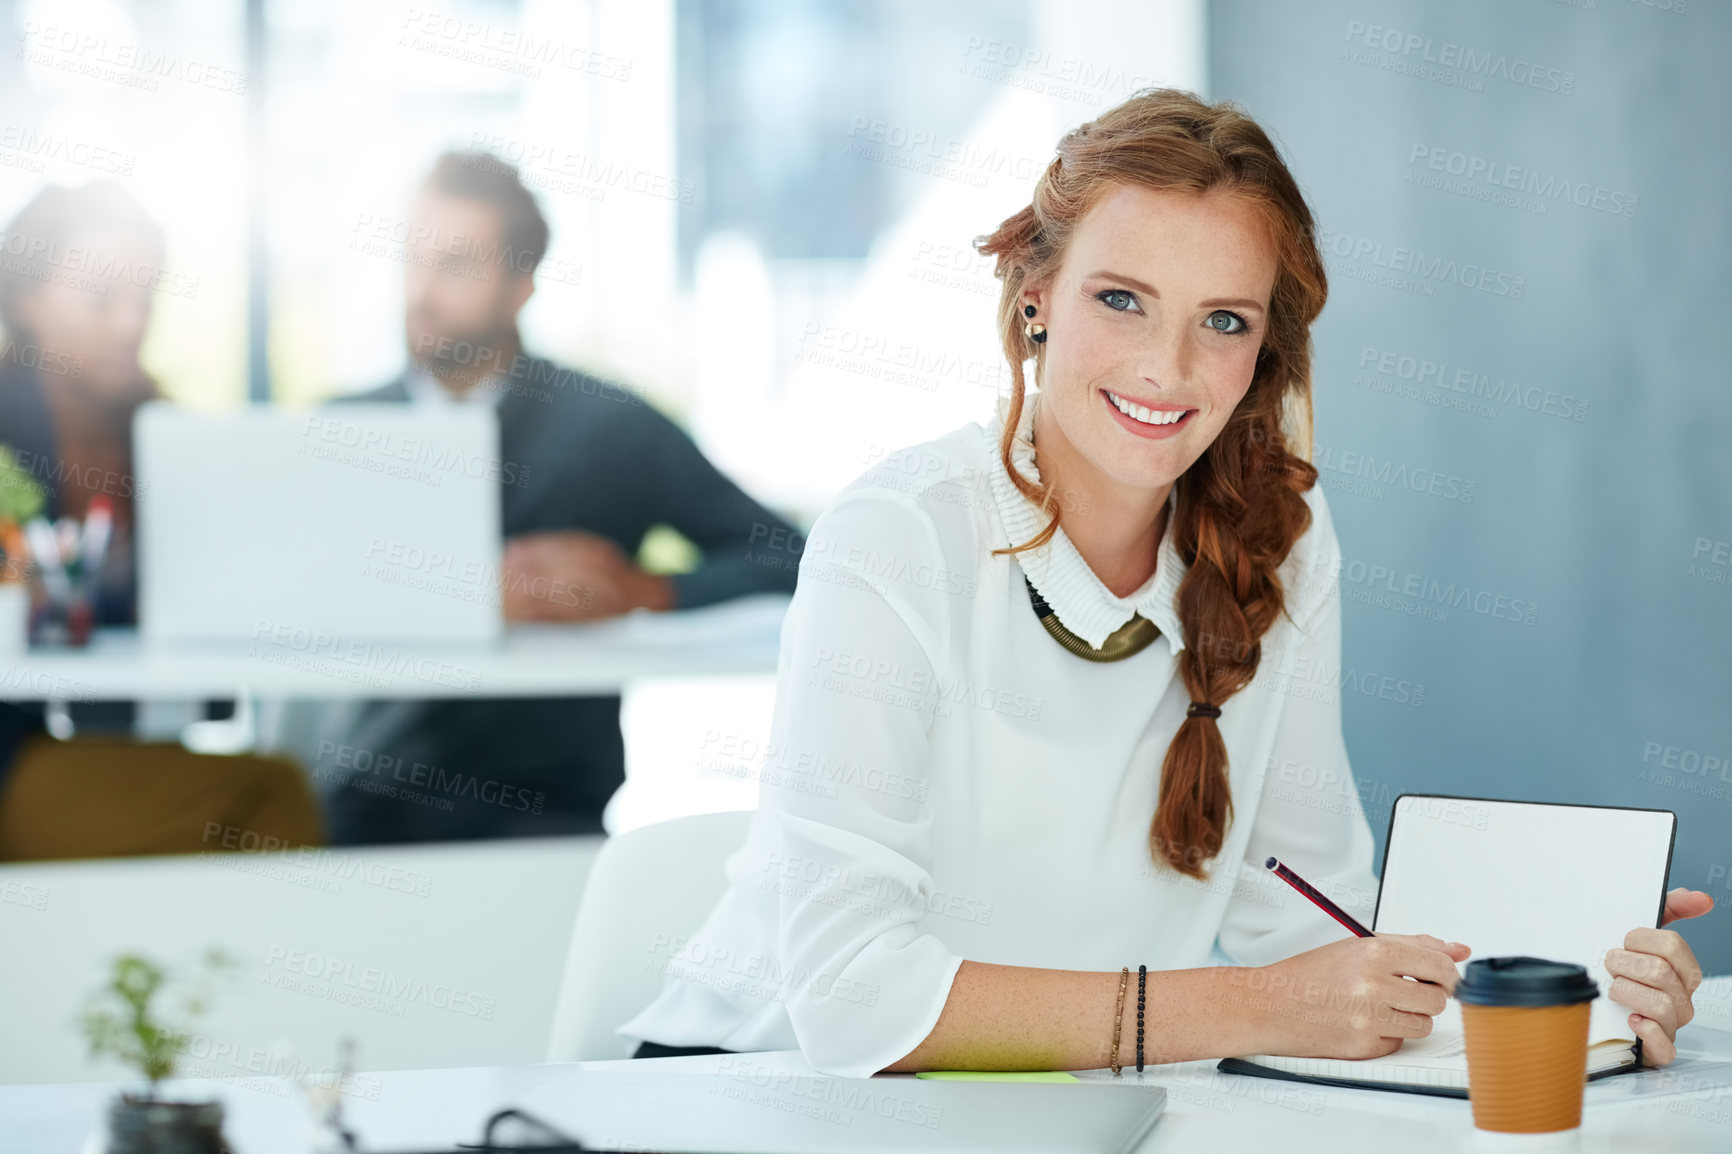 Buy stock photo Portrait of a young businesswoman working in an office with colleagues in the background